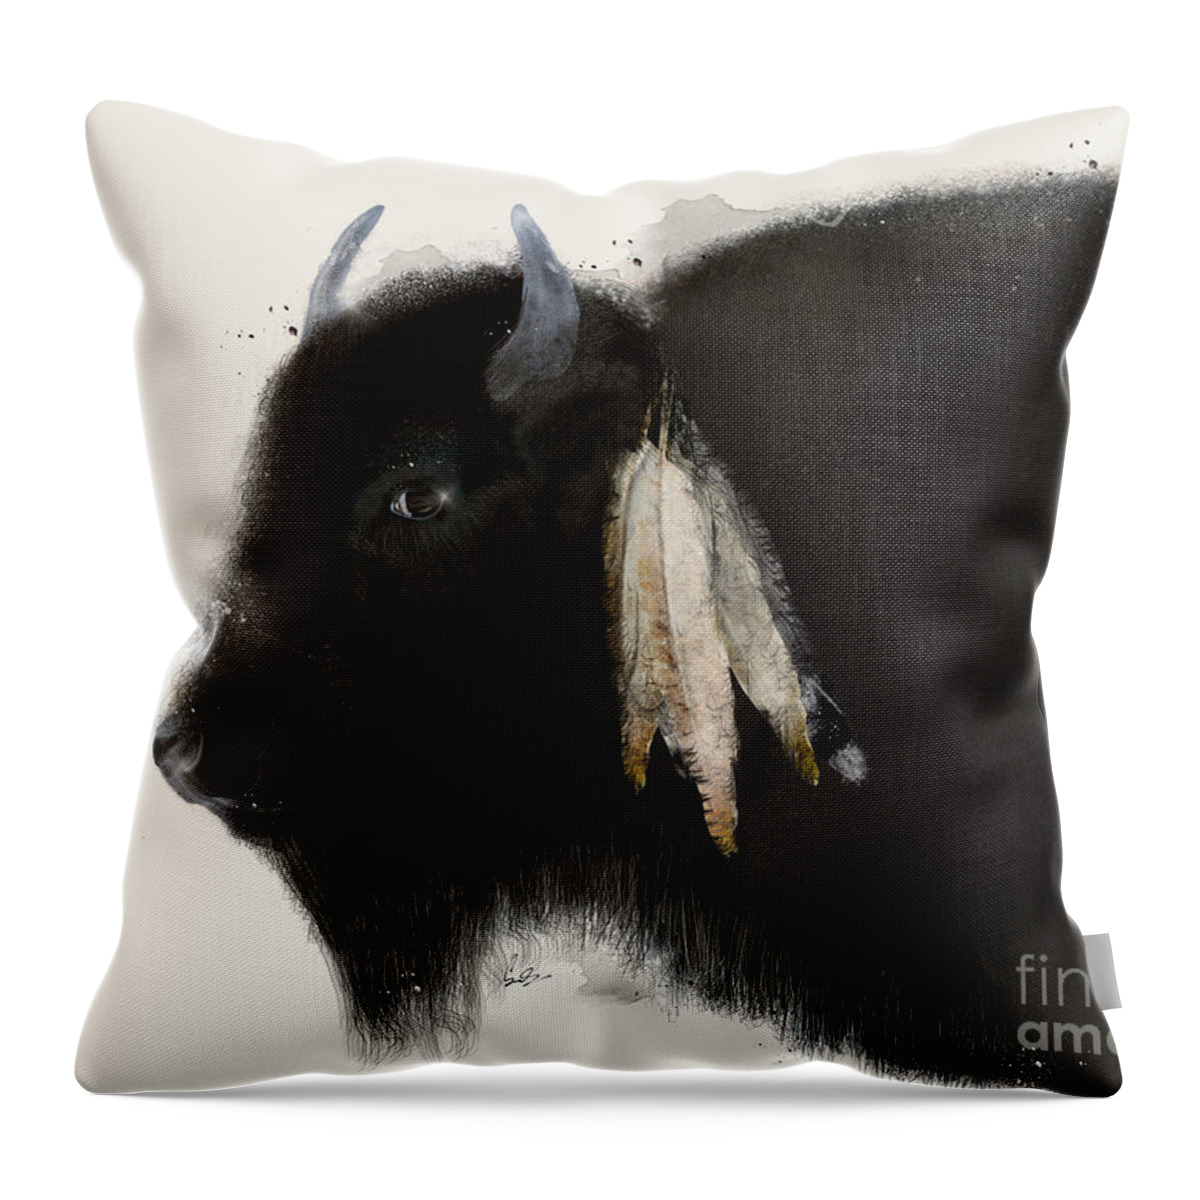 Buffalo Throw Pillow featuring the painting American Buffalo by Bri Buckley